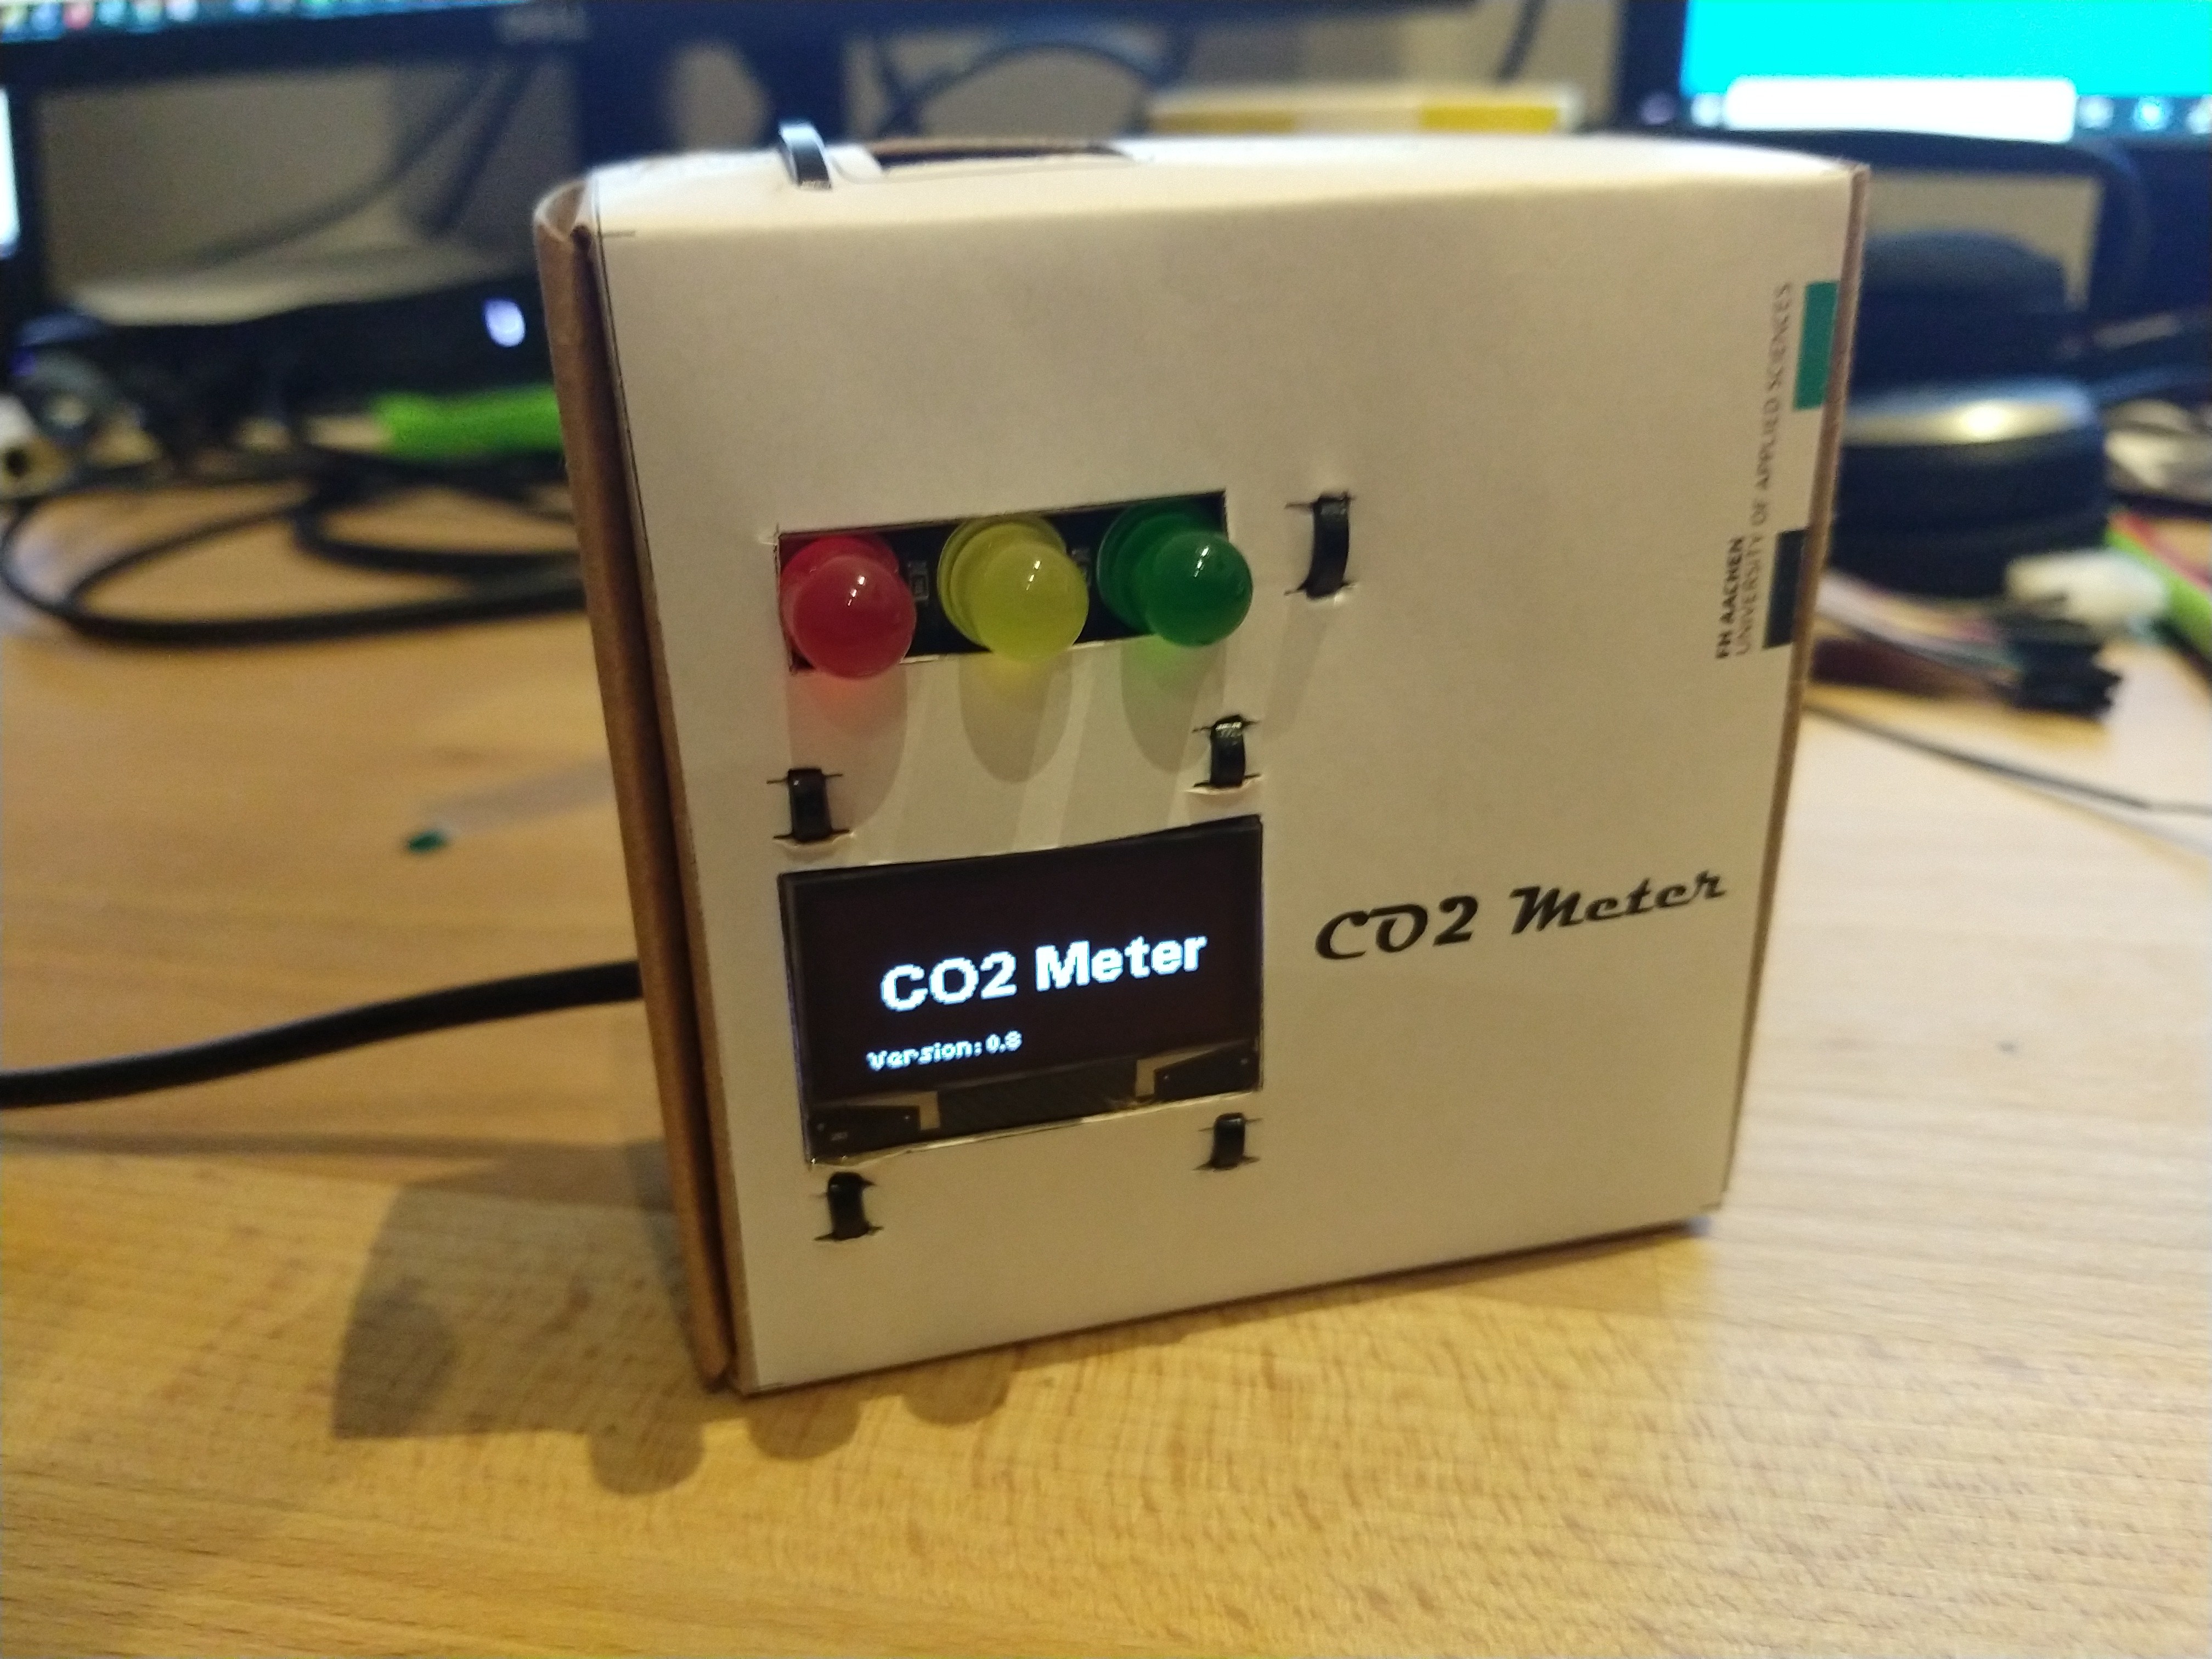 CO2 Meter Kit for the Classroom